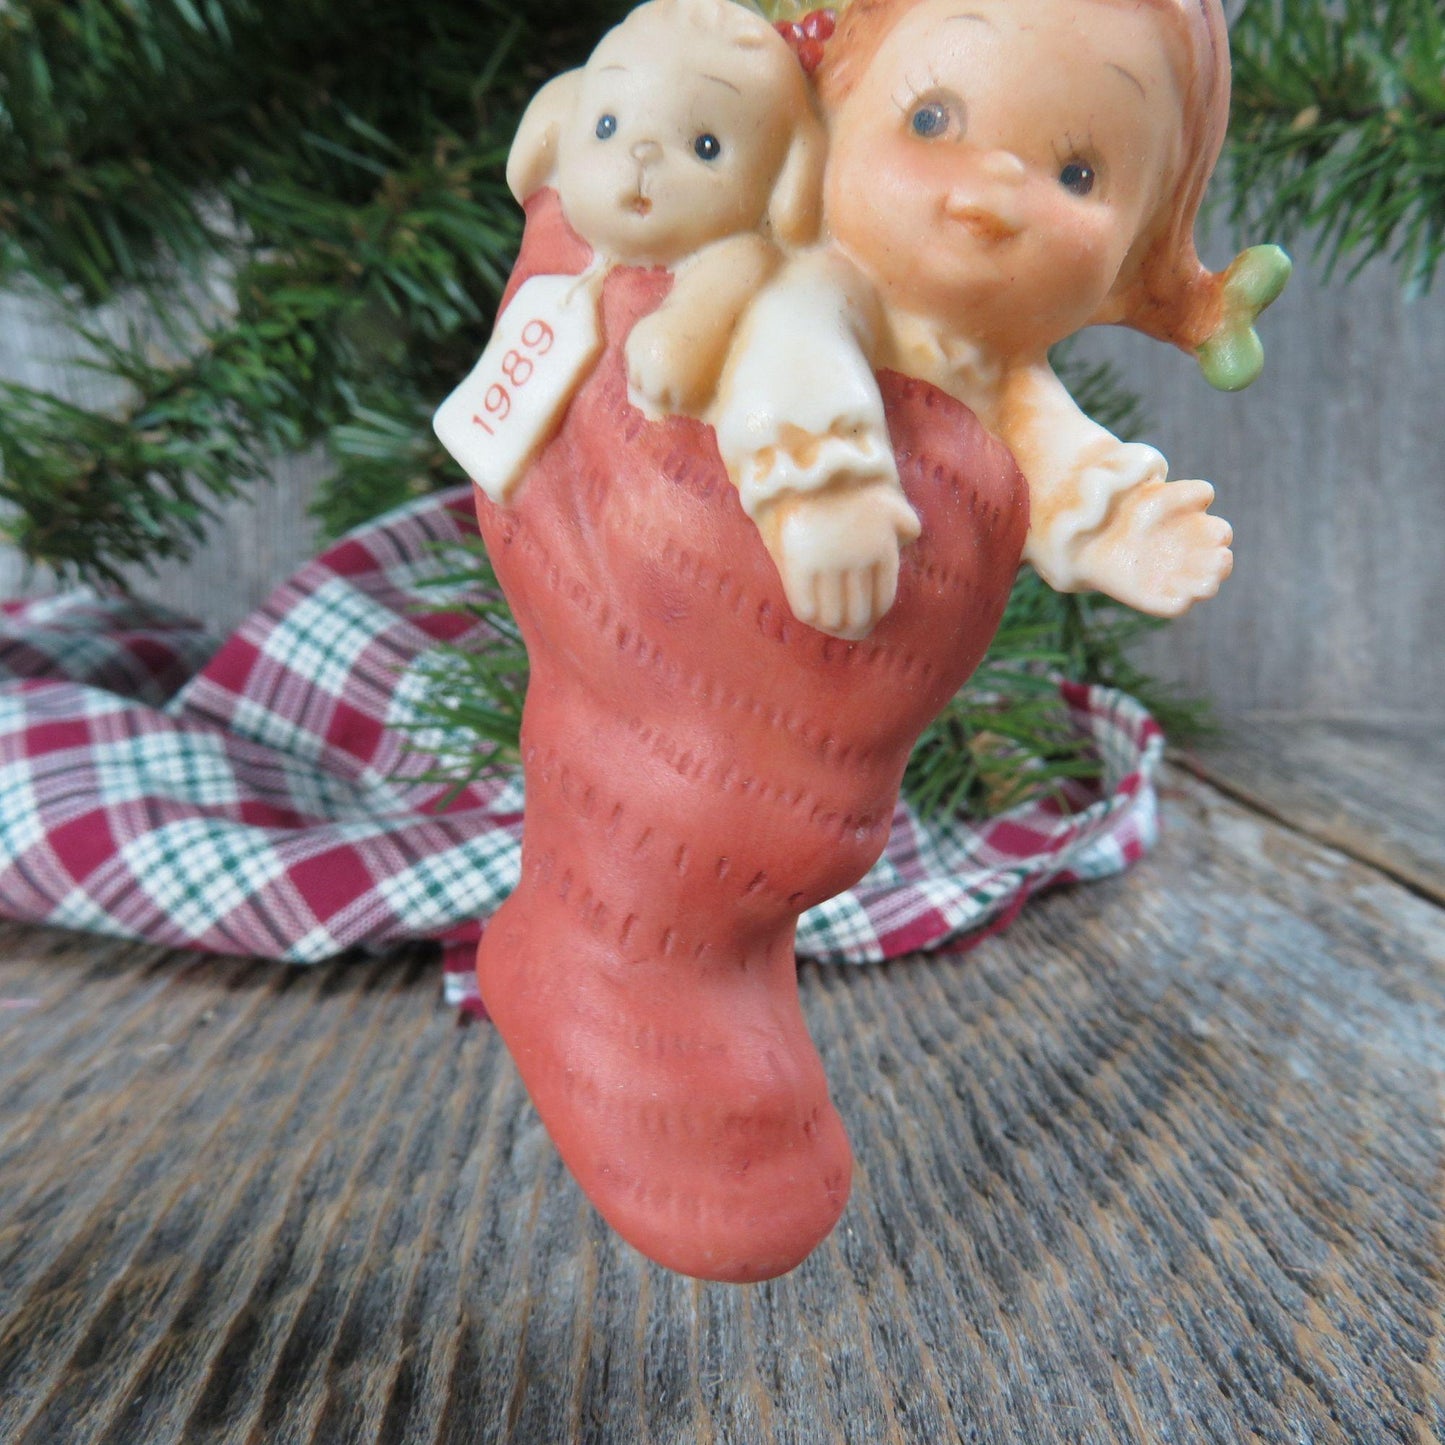 Vintage Doll and Lamb in Stocking Ornament A Surprise for Santa Little Girl Memories of Yesterday by Enesco 1989